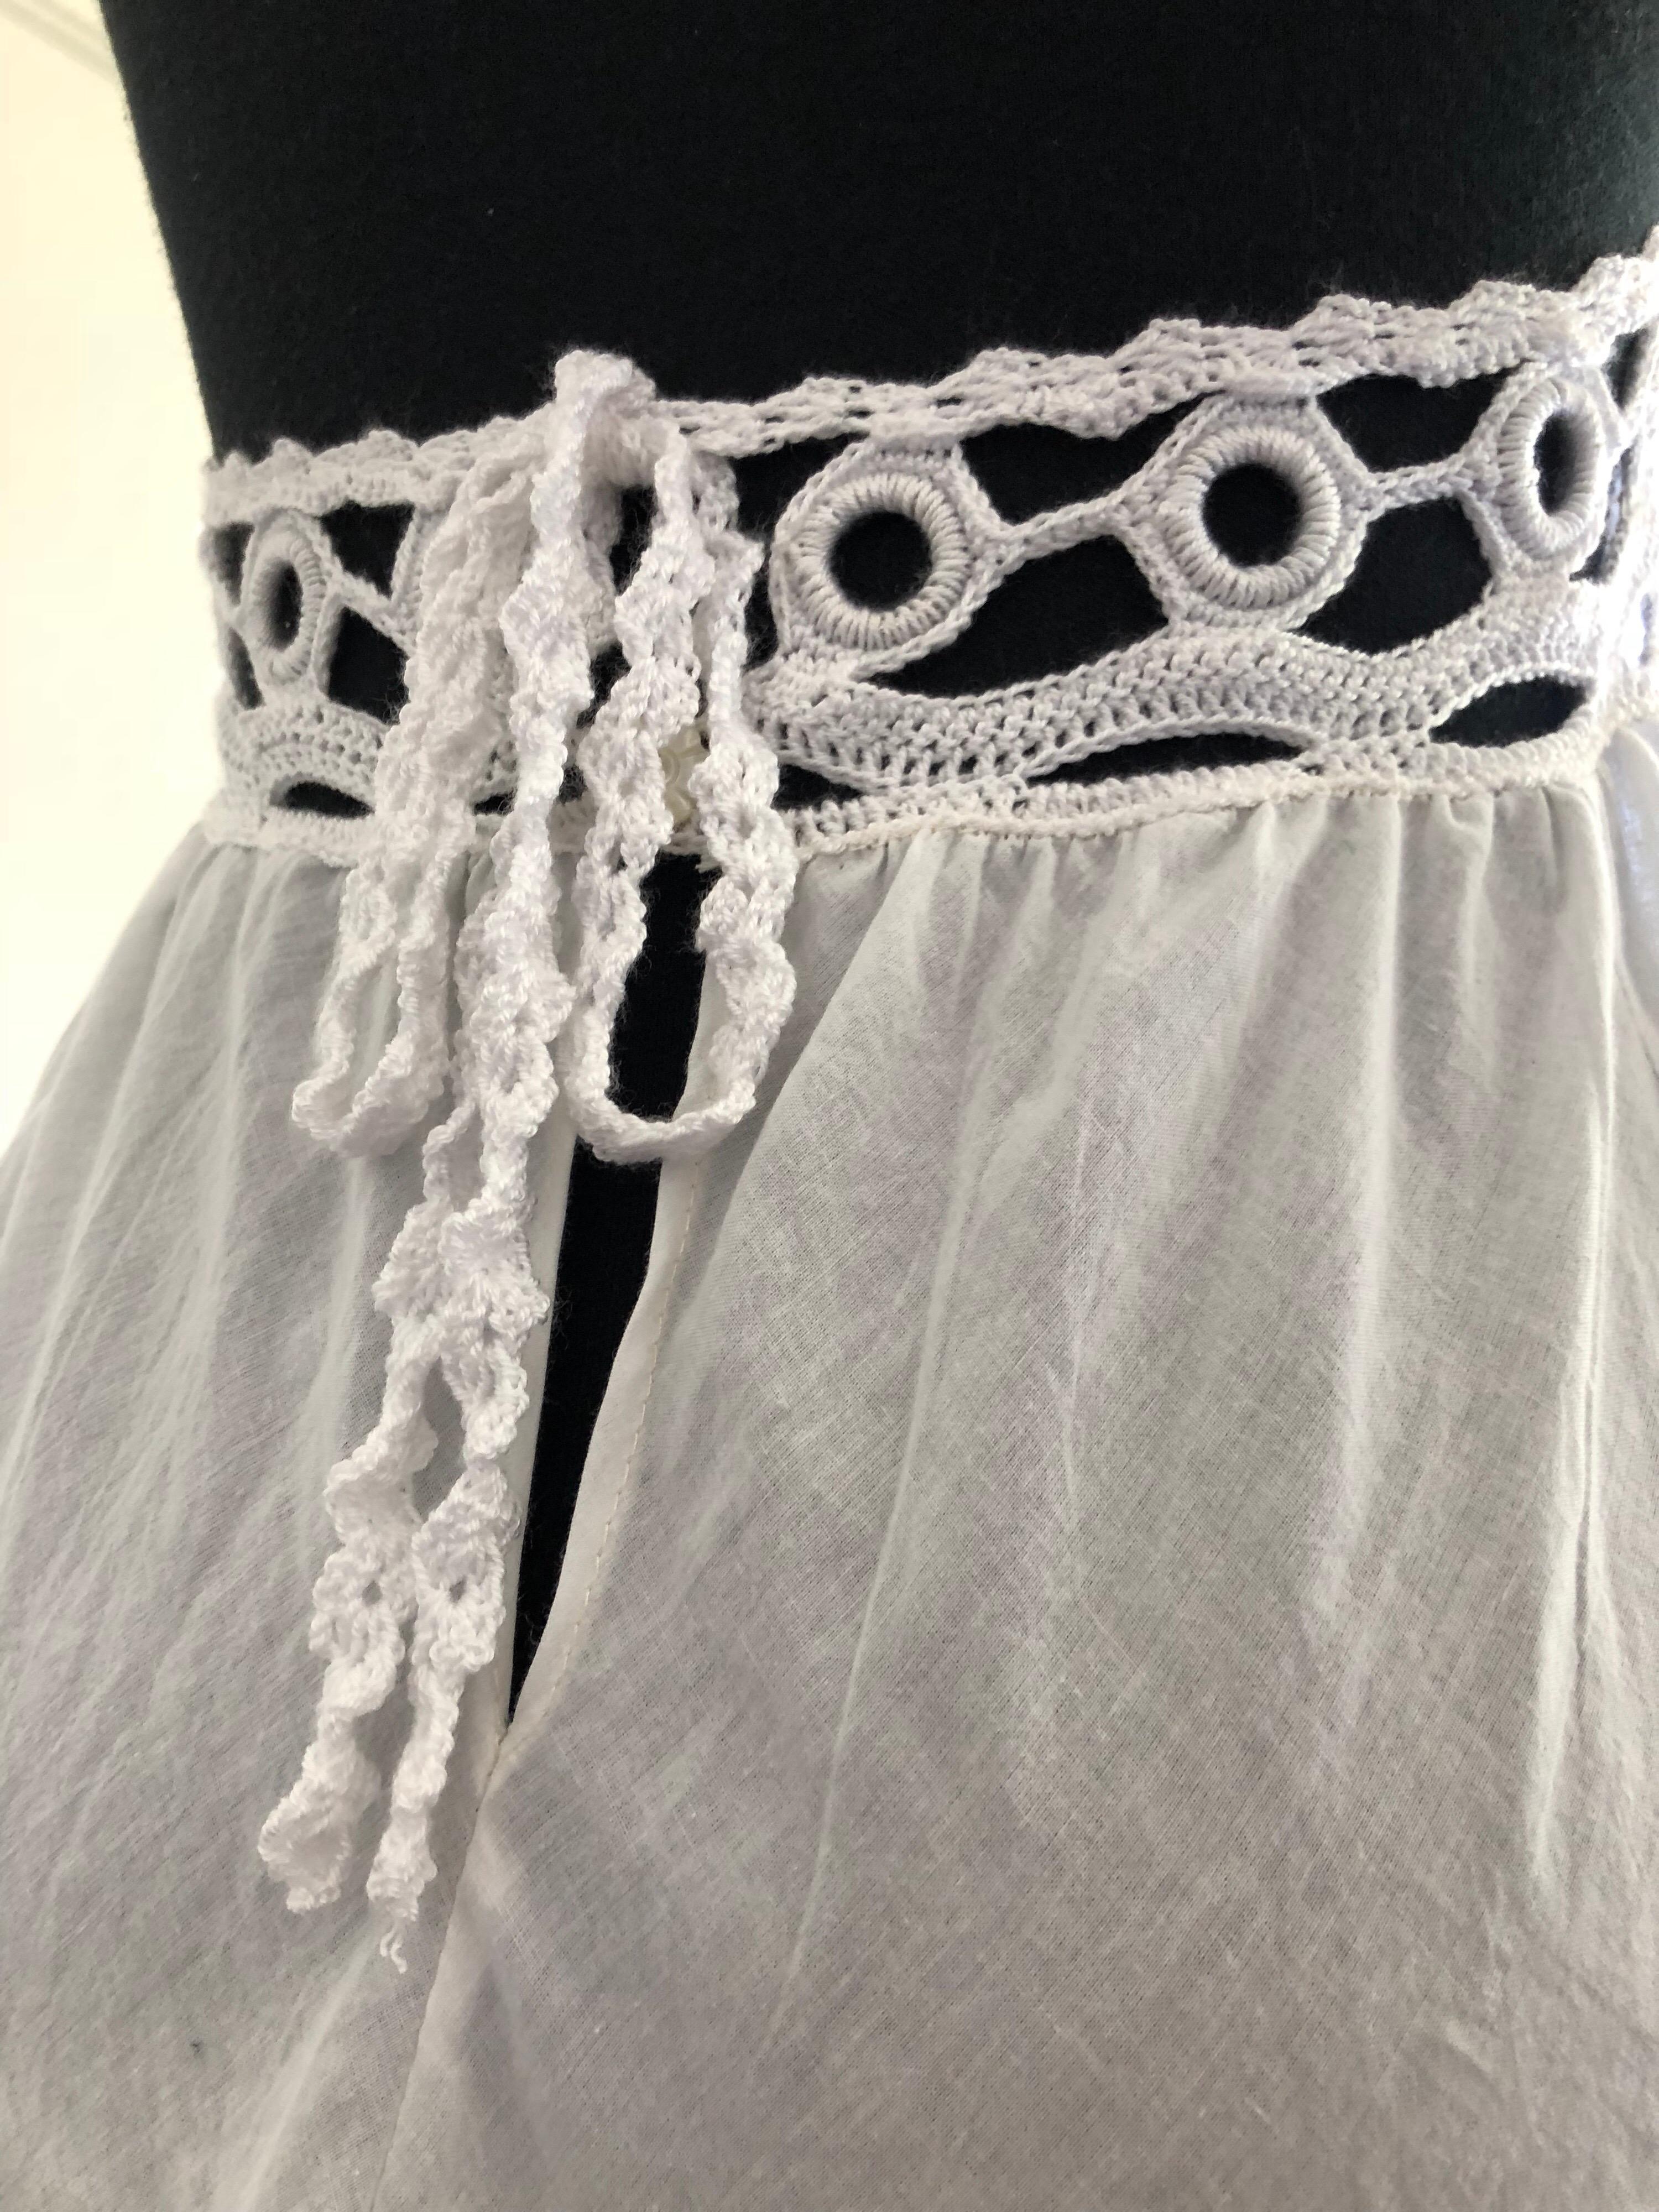 1970s-Style Summer Halter Midi Dress W/ Hand-Crochet & Victorian Eyelet Skirt In Excellent Condition For Sale In Gresham, OR